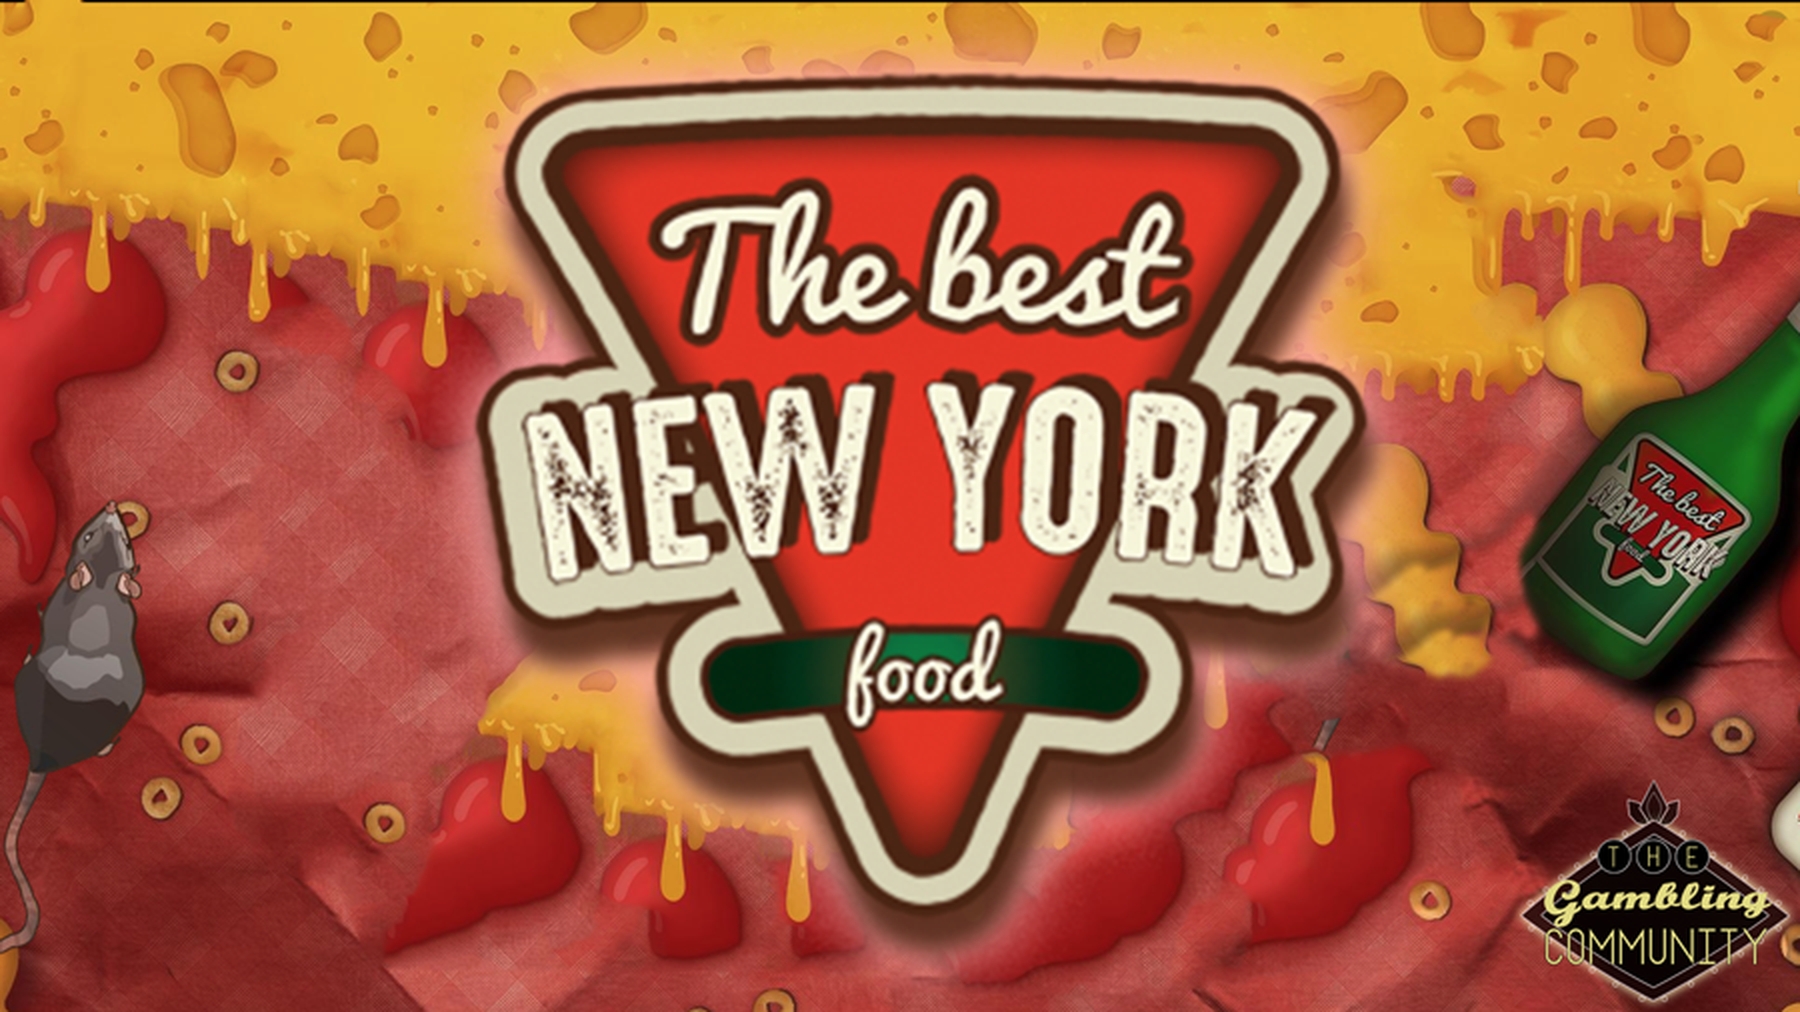 The Best New York Food demo